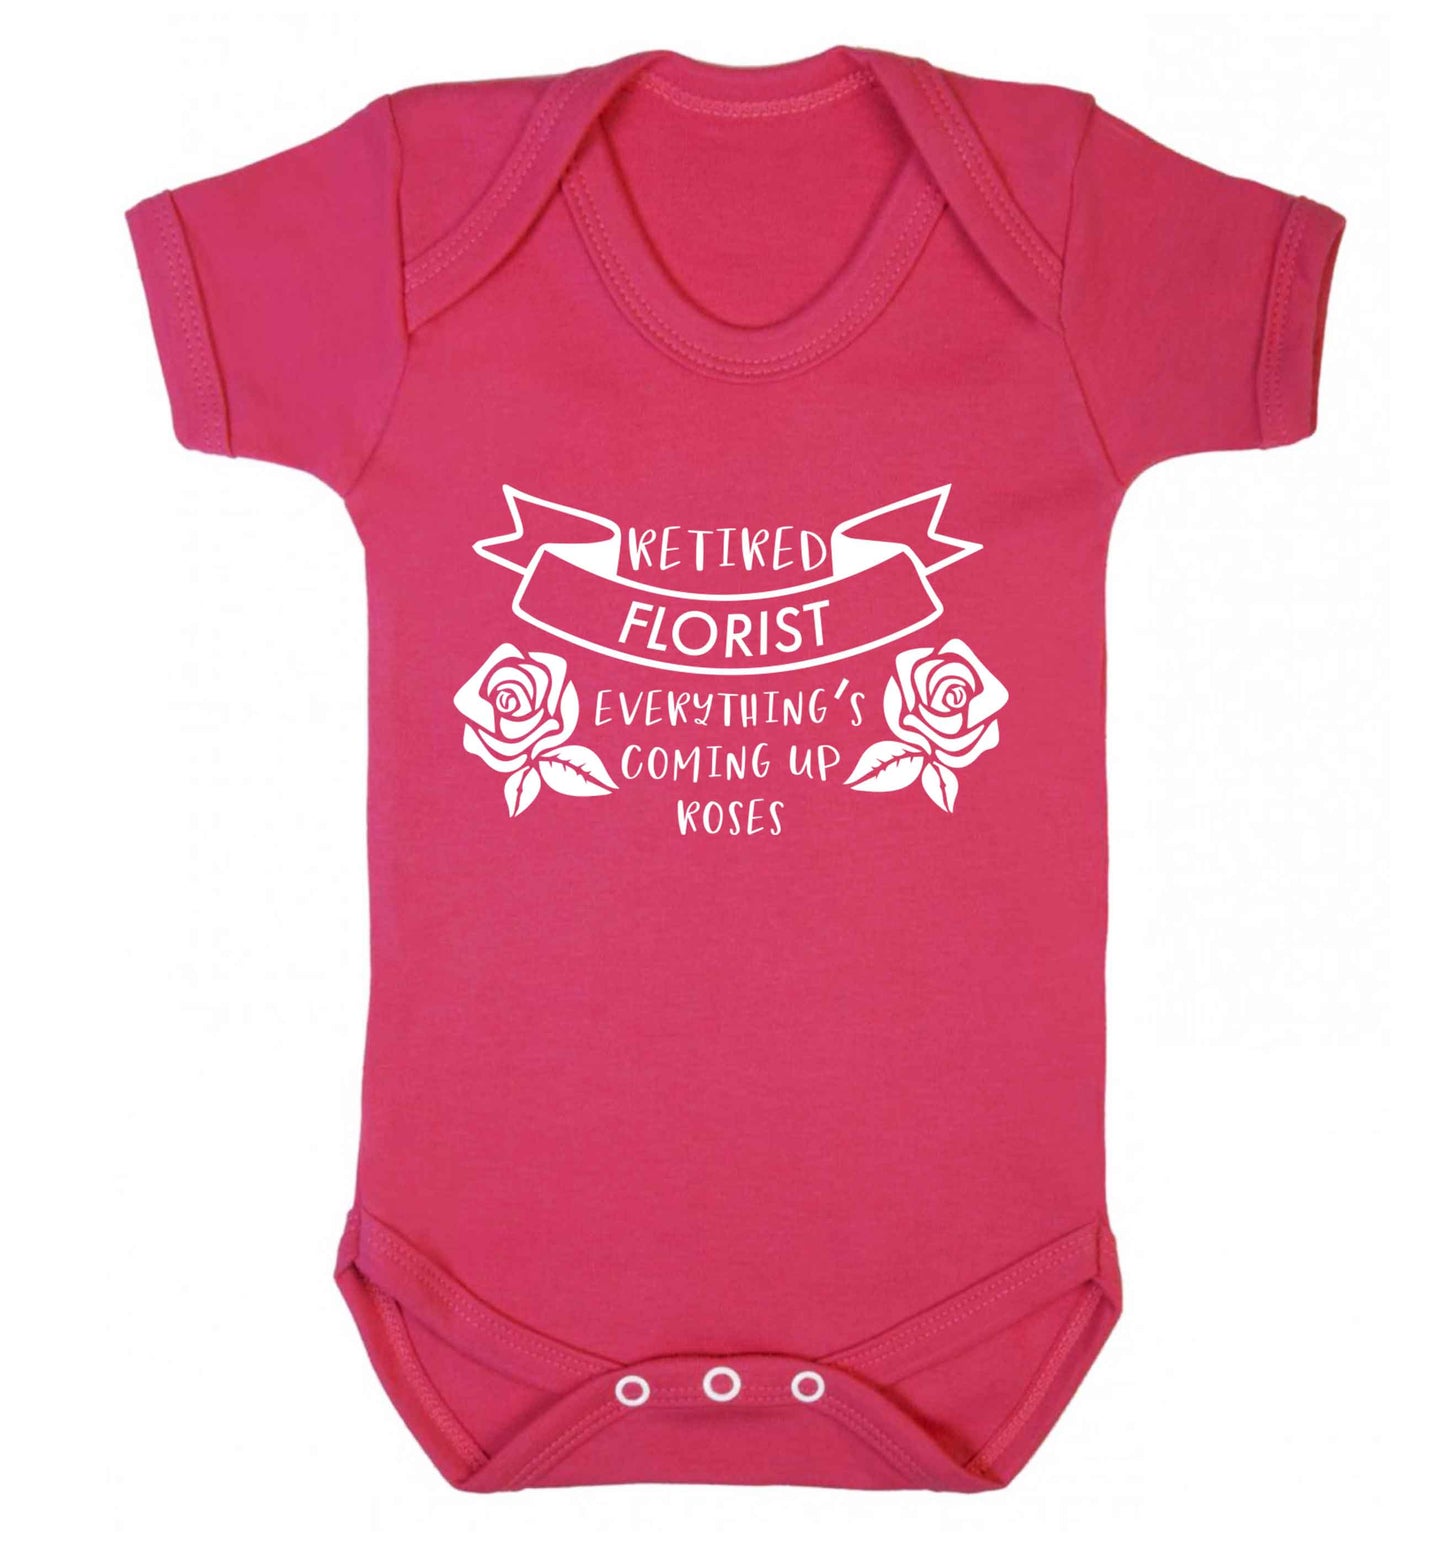 Retired florist everything's coming up roses Baby Vest dark pink 18-24 months